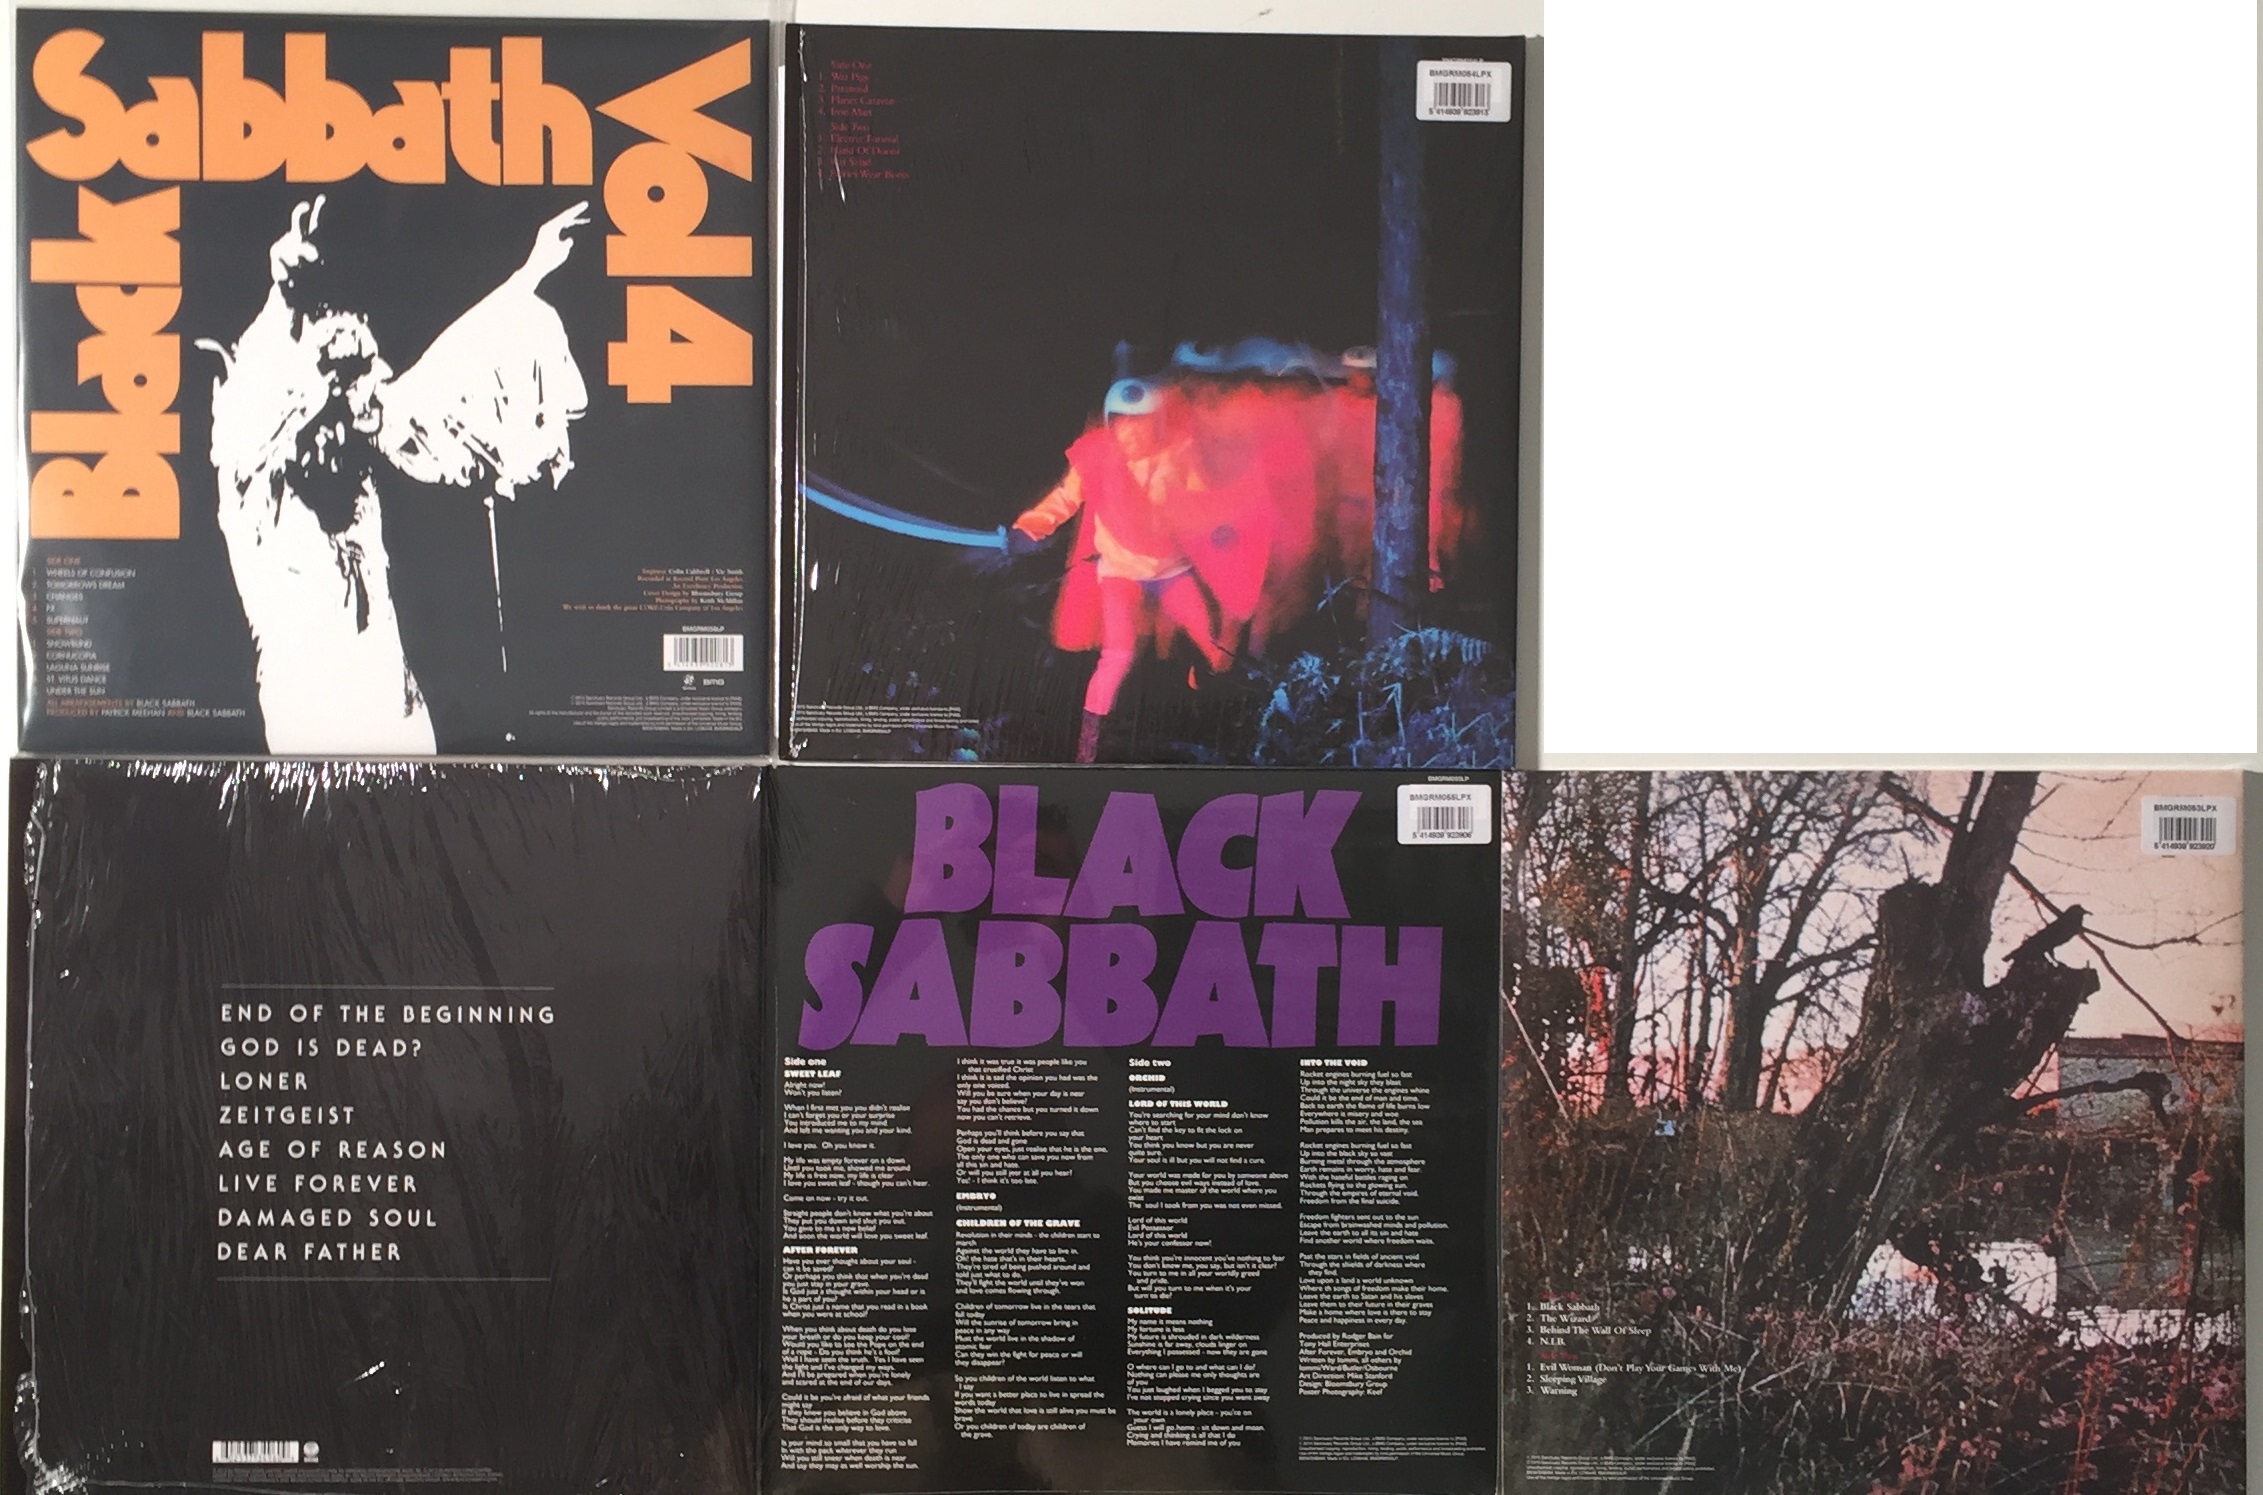 BLACK SABBATH - HIGH QUALITY/LIMITED EDITION LPs. Scorching pack of 5 x high quality pressing LPs. - Image 2 of 2